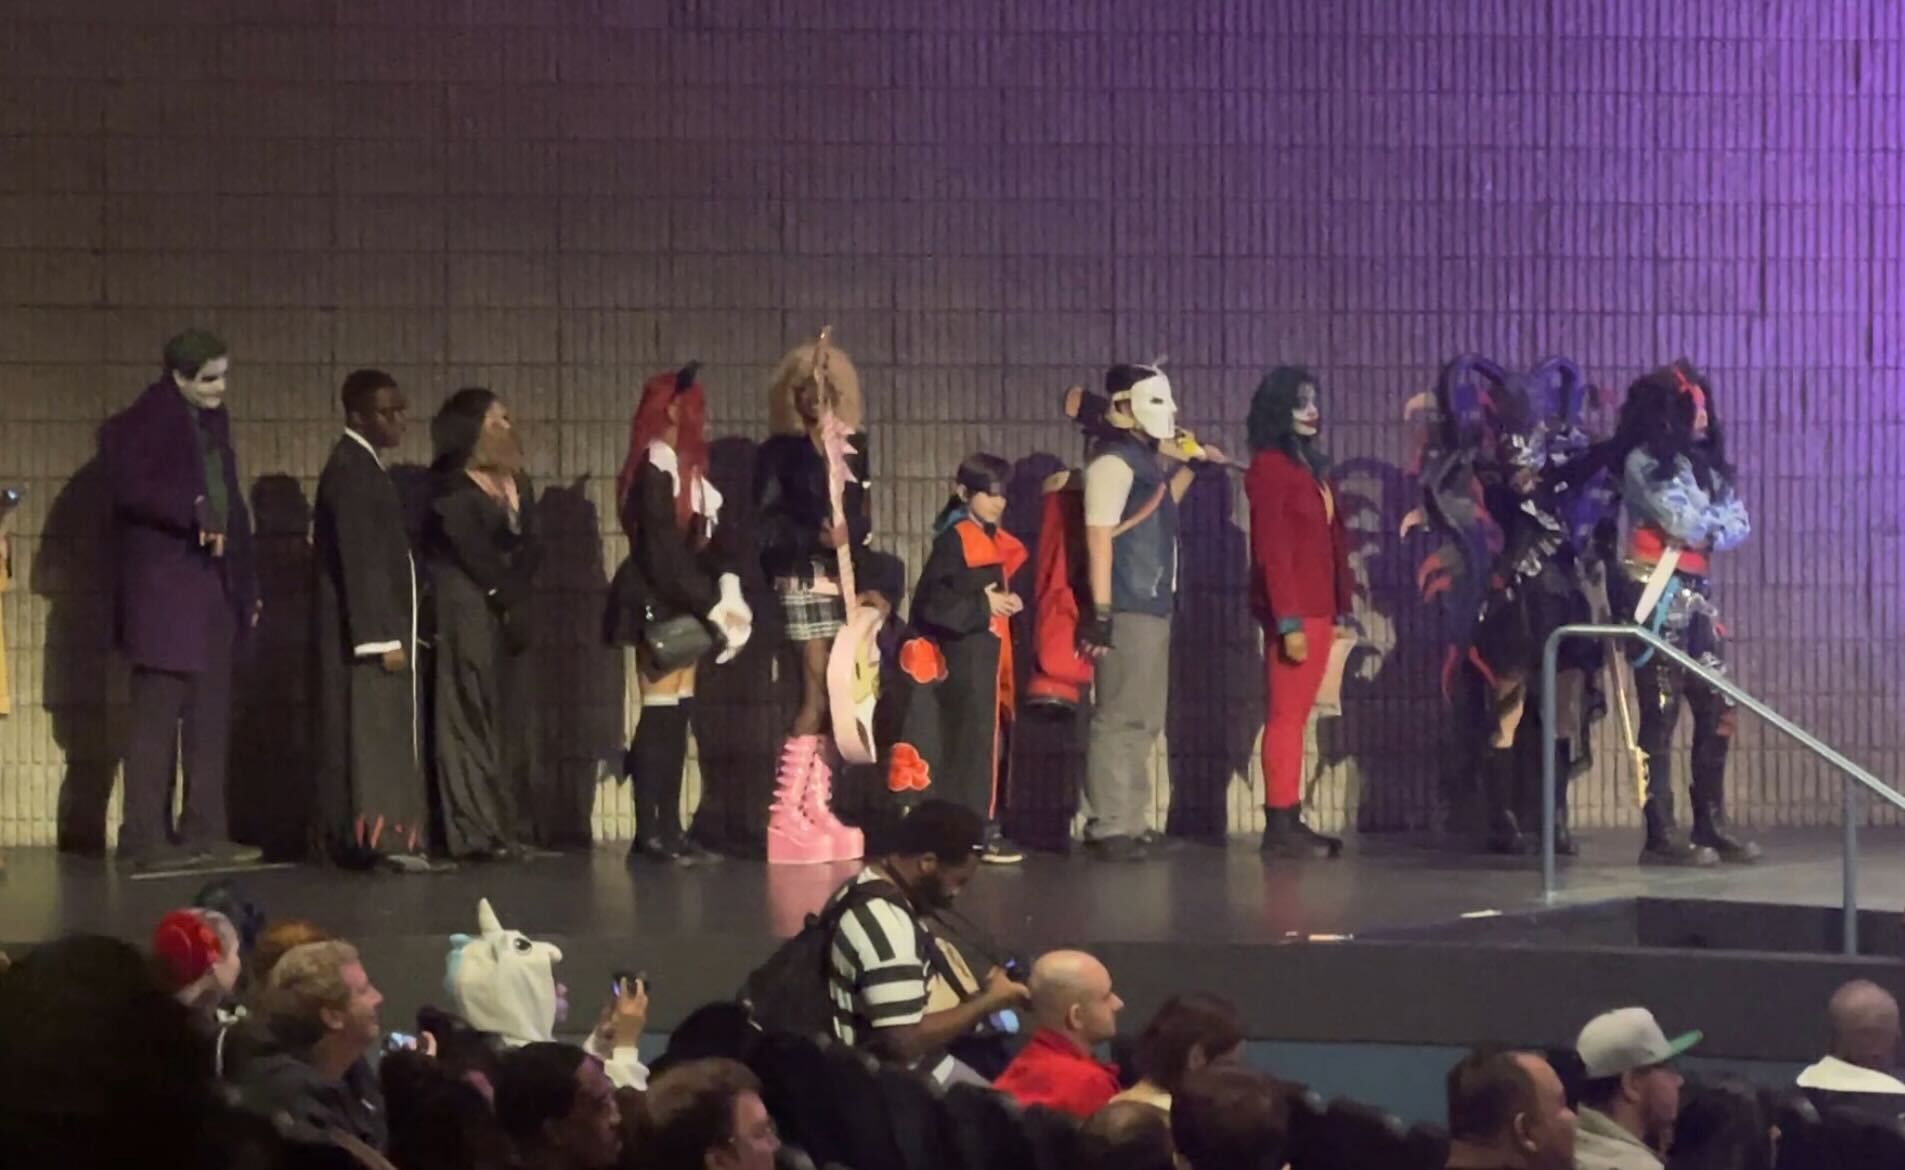 Several people dressed in costumes wait in line for the cosplay contest.